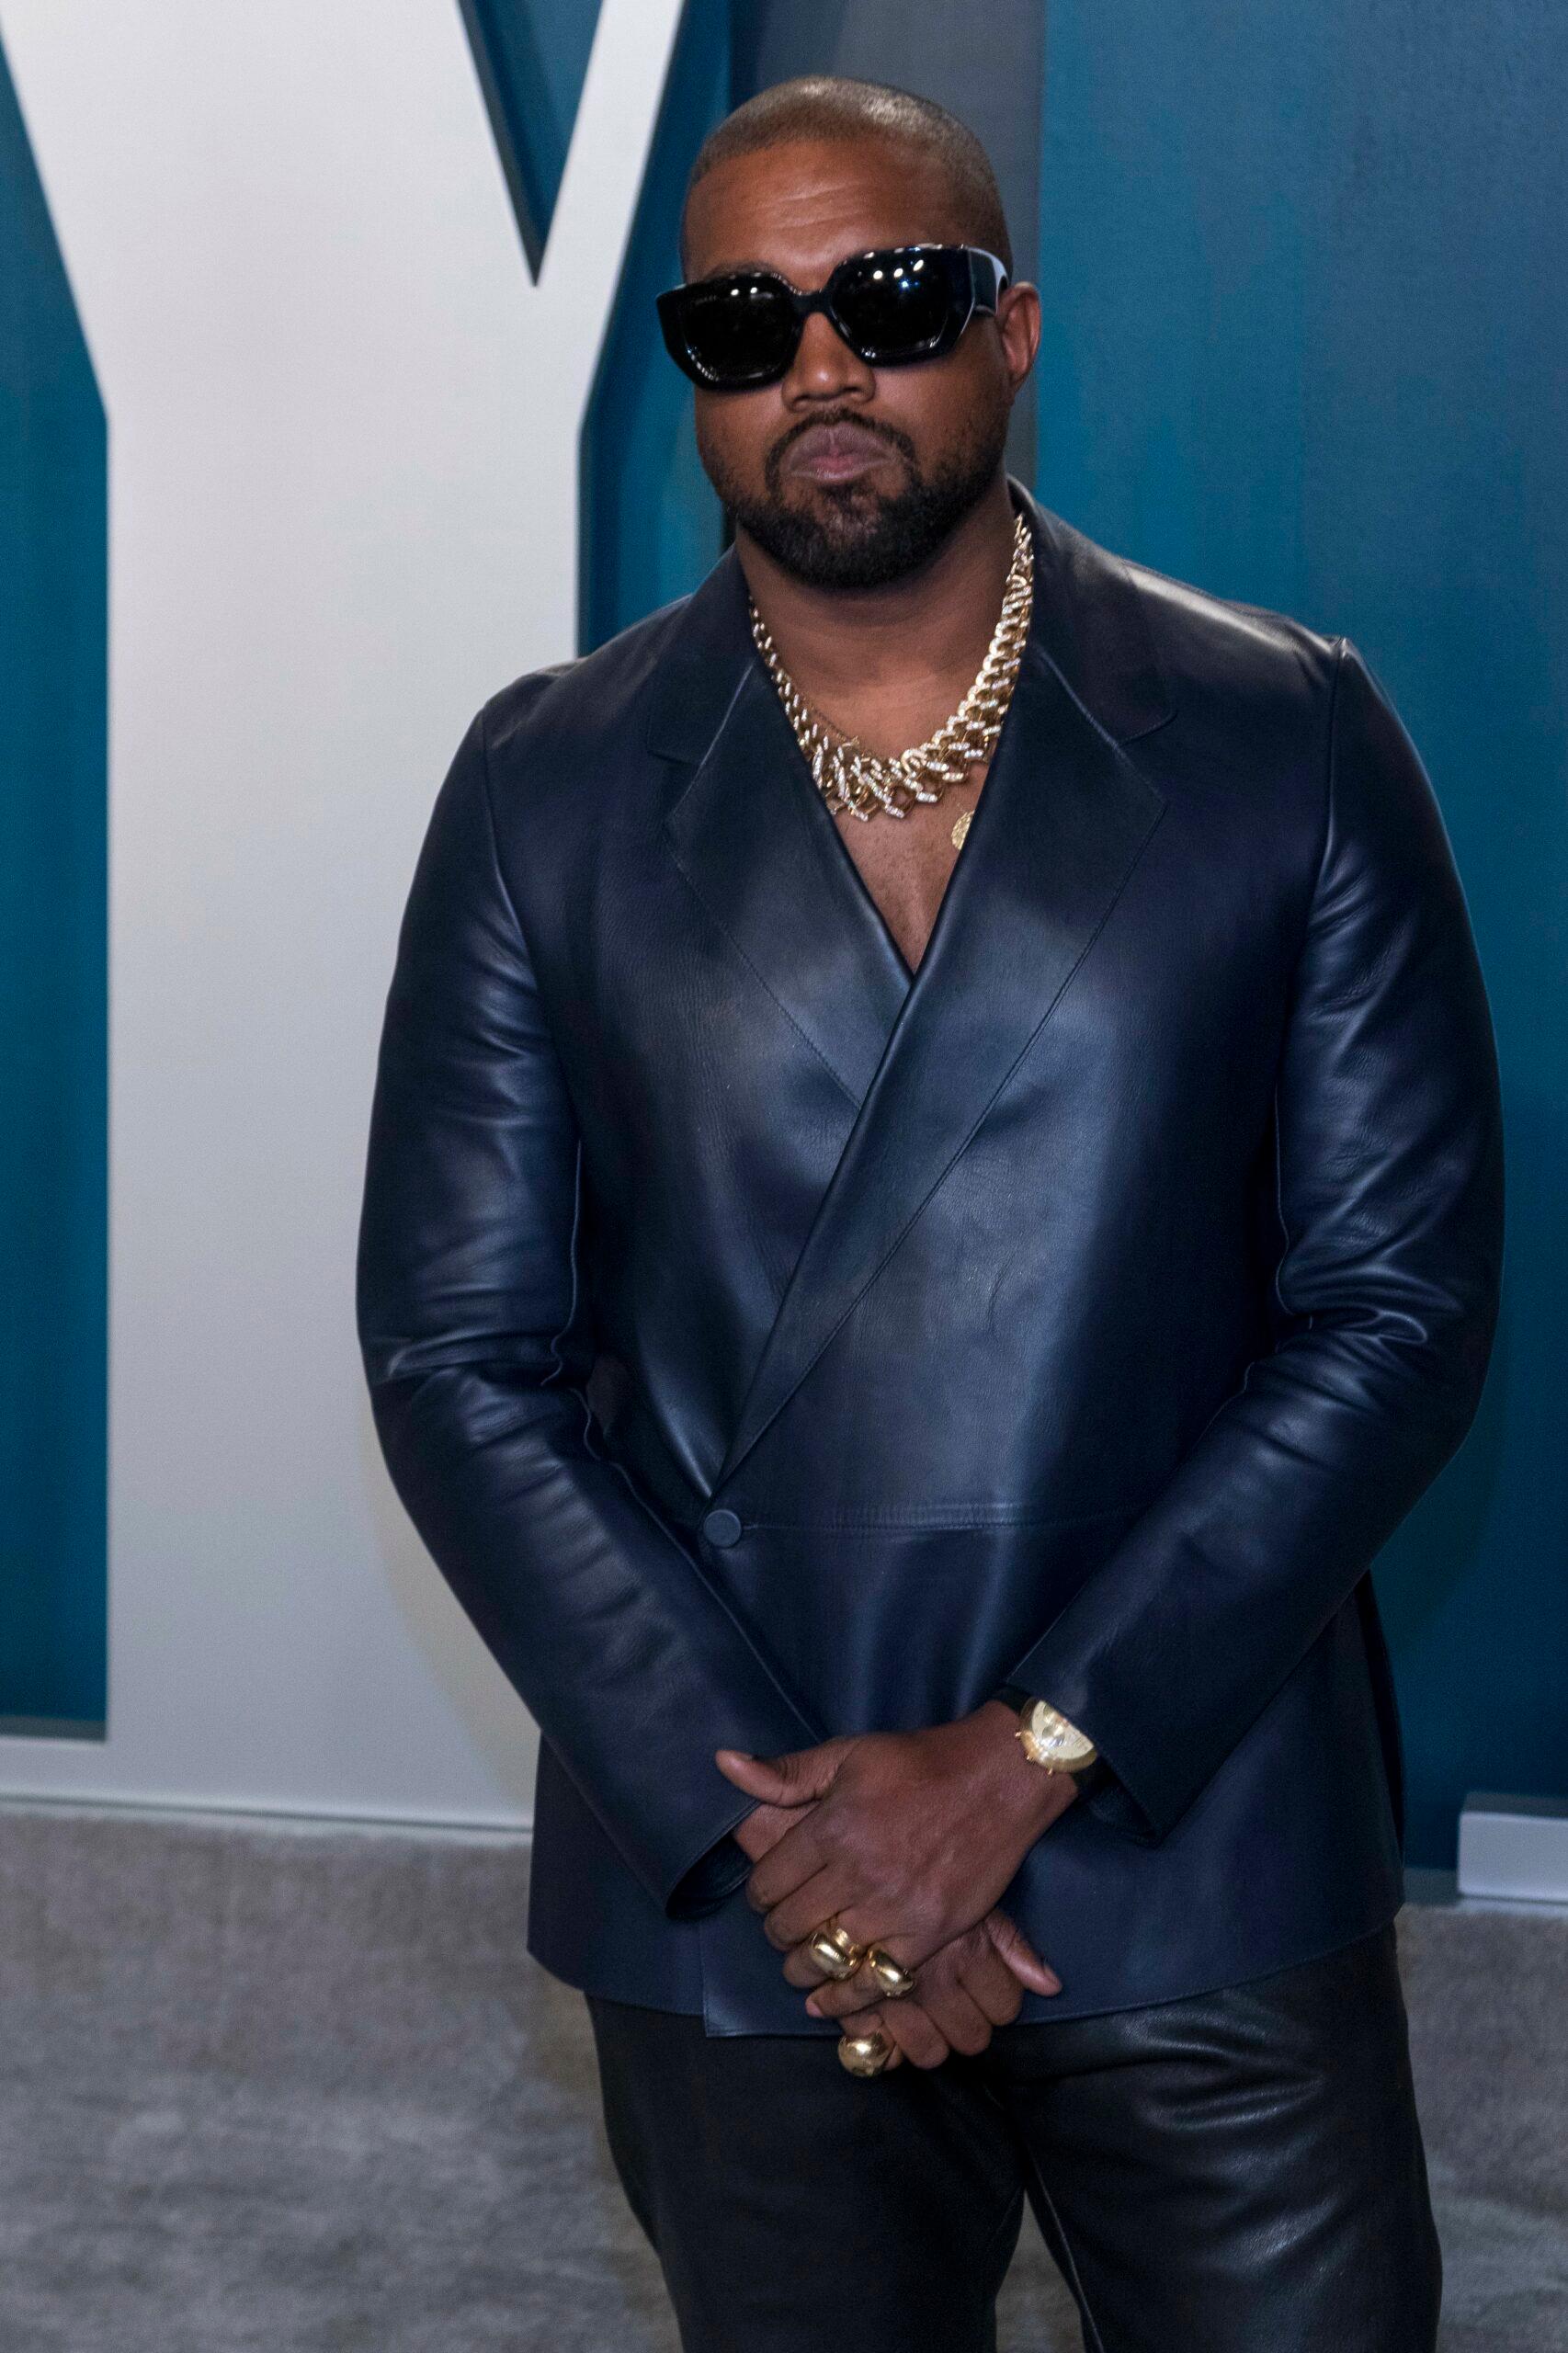 Kanye West at the Vanity Fair Oscar Party, Arrivals, Los Angeles, USA - 09 Feb 2020